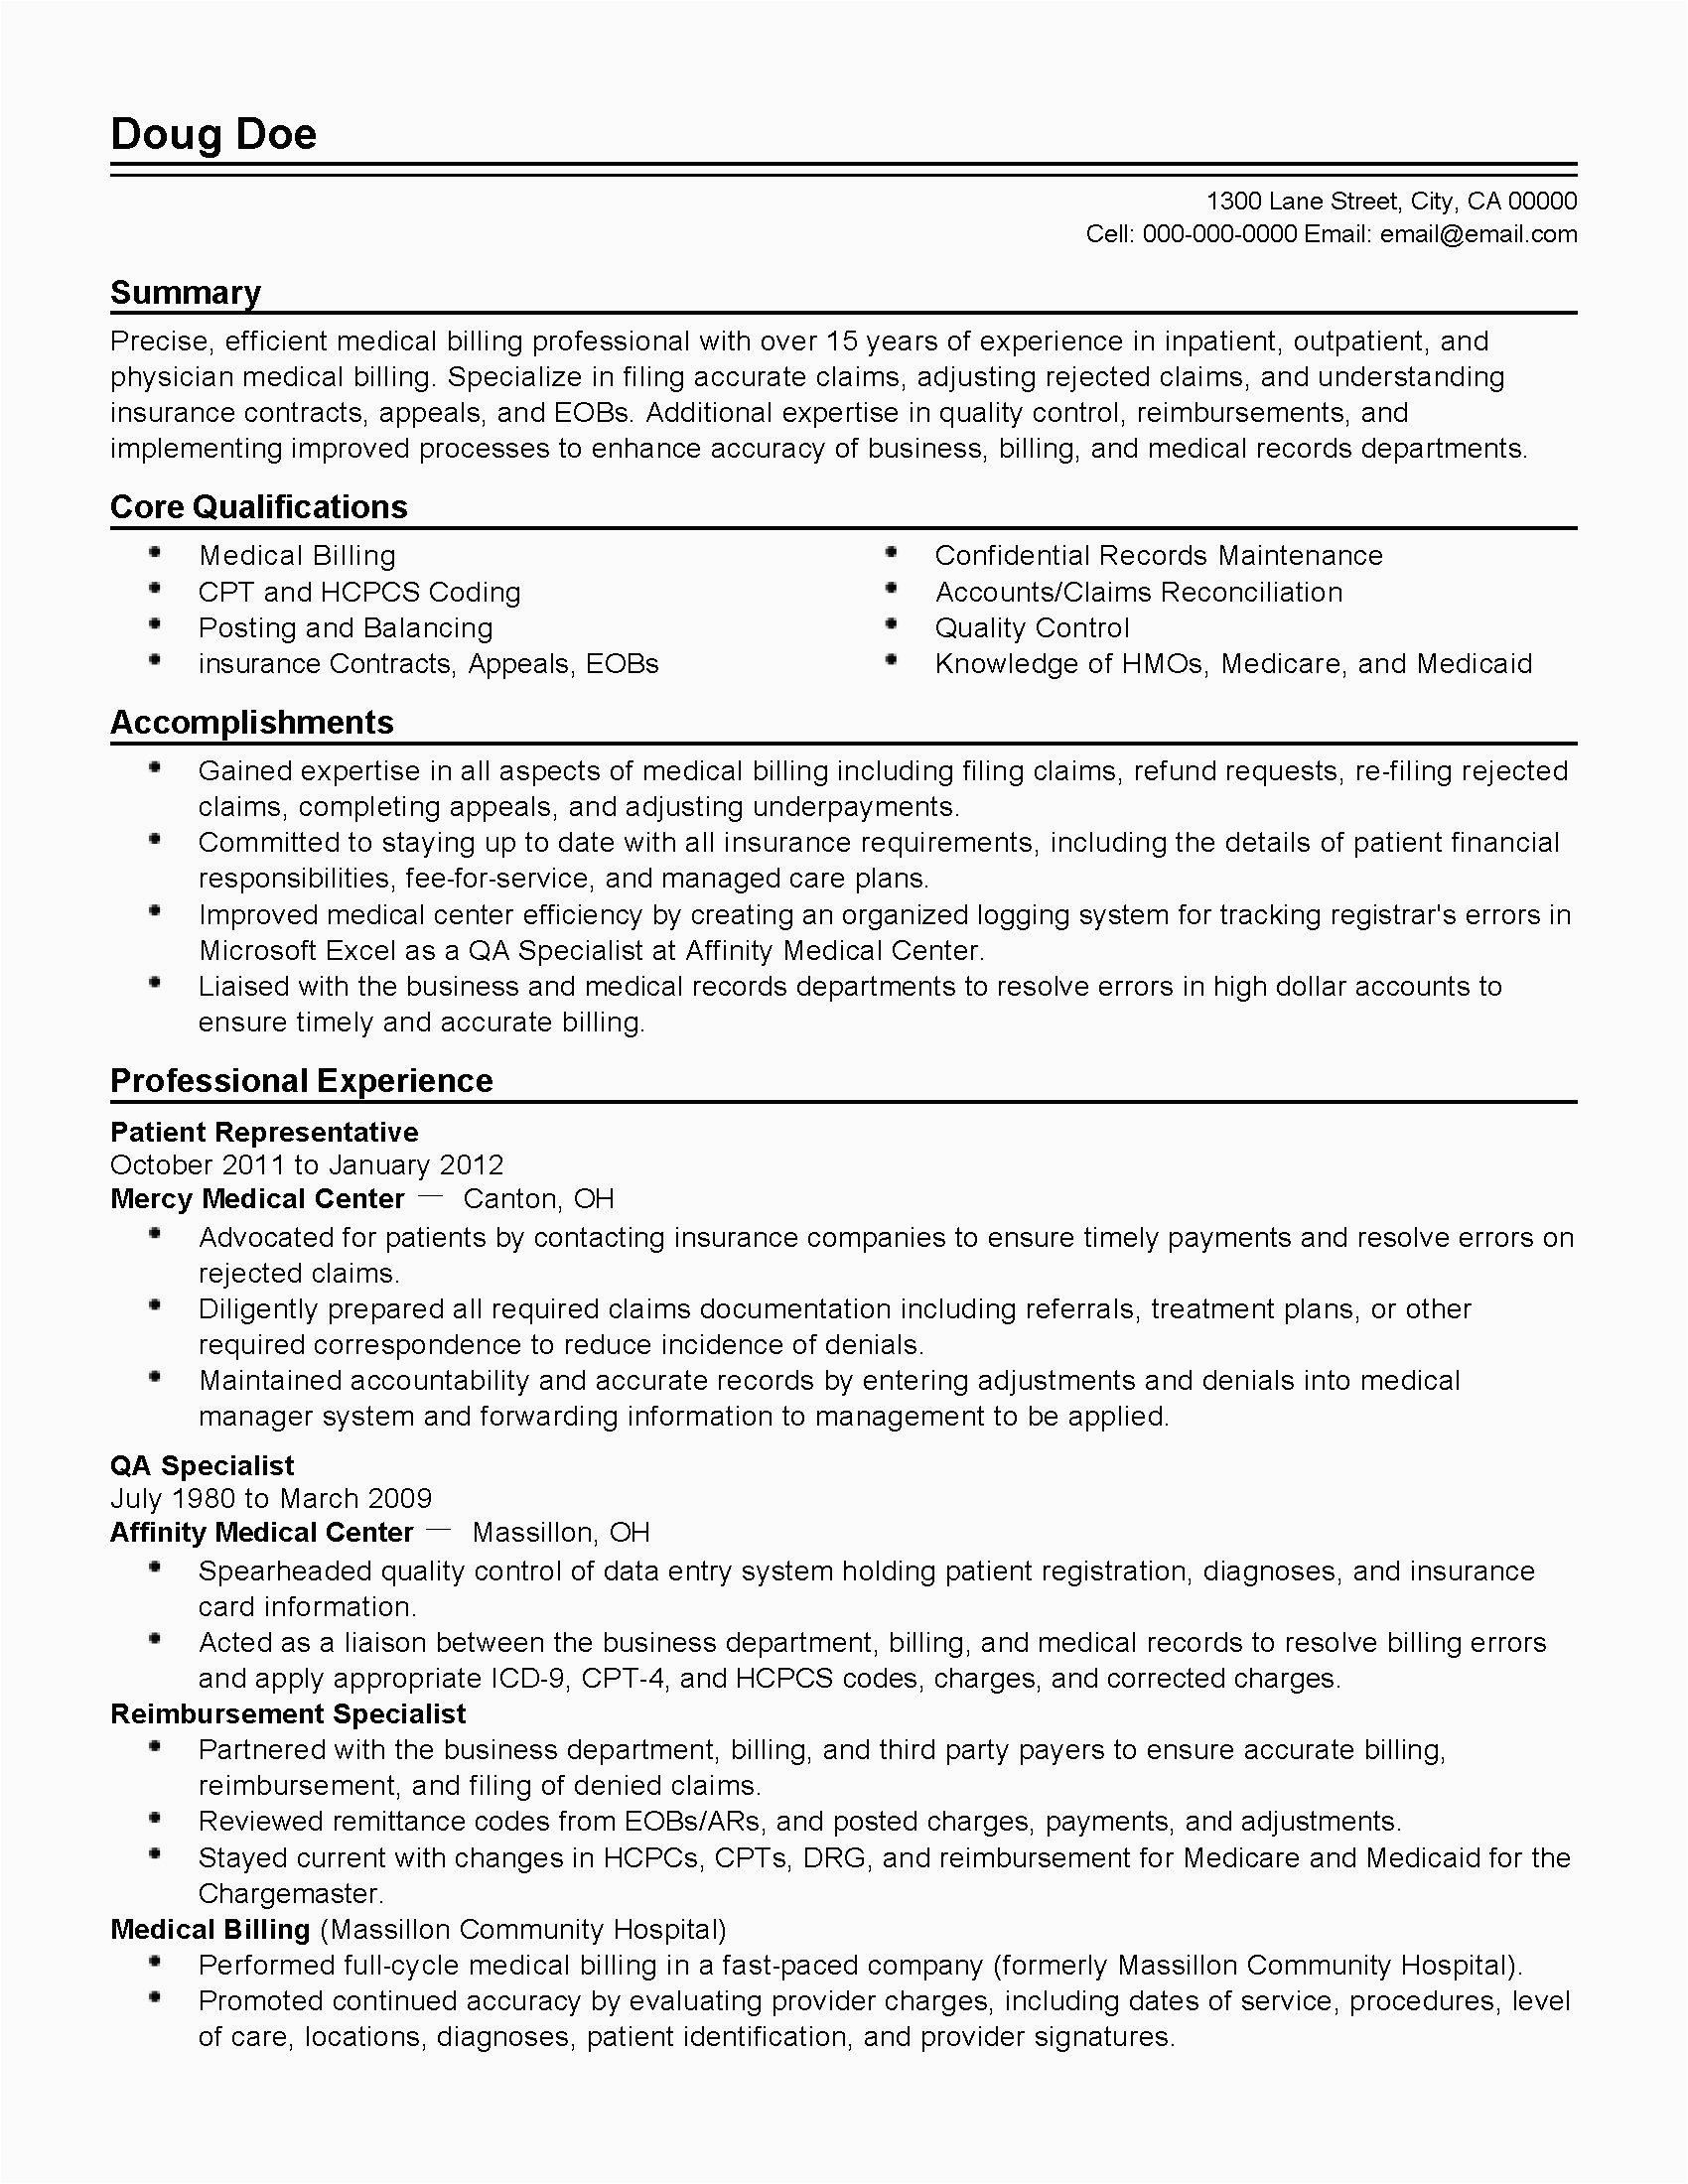 Free Medical Billing and Coding Resume Templates Medical Coding Resume Example Beautiful Professional